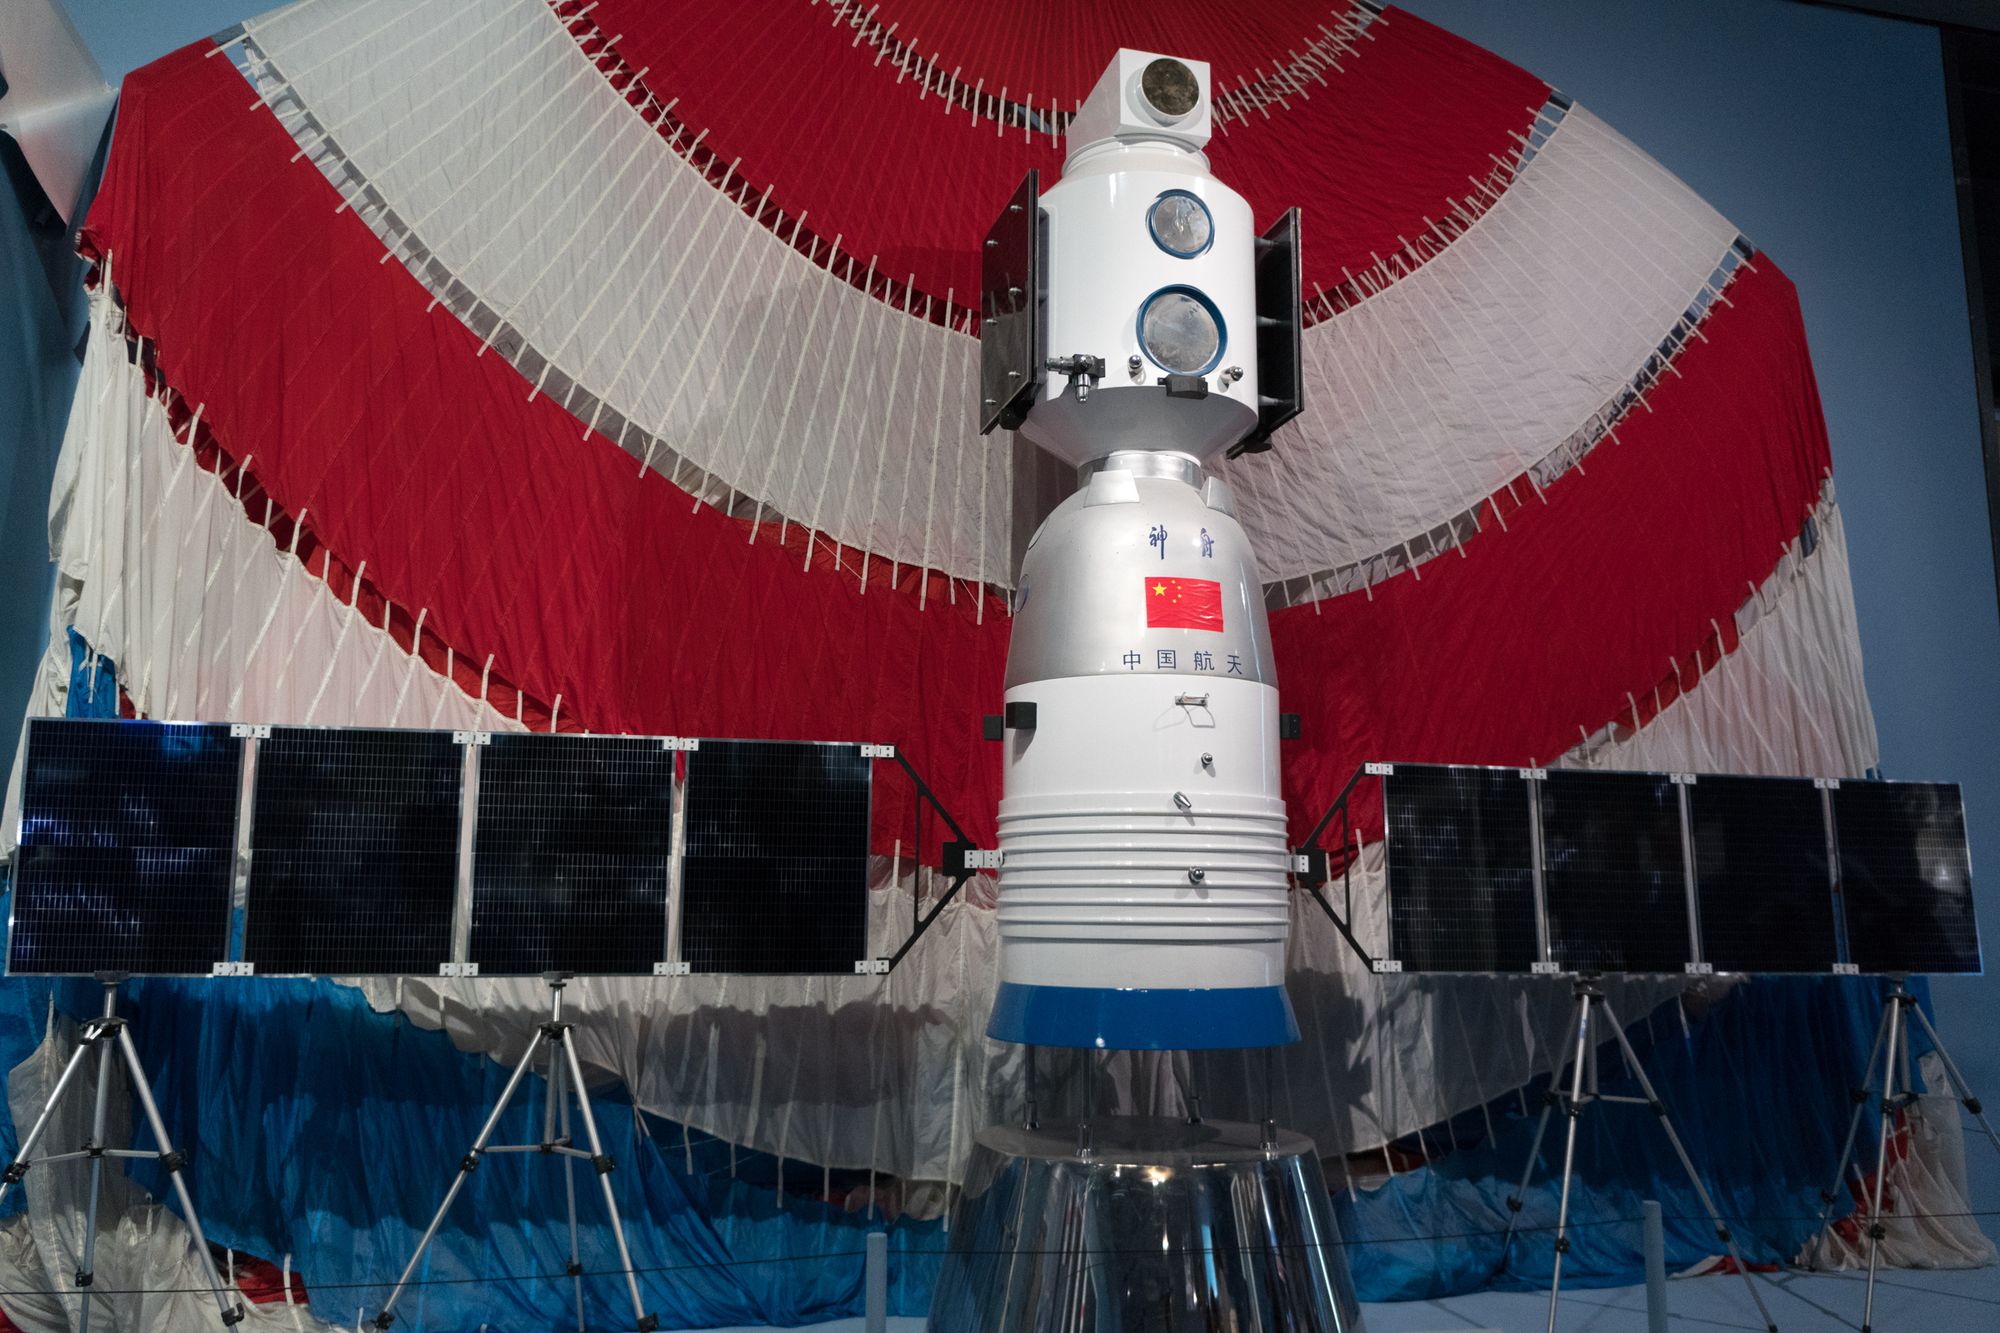 Shenzhou-5 spacecraft mock-up and parachute displayed at the National Museum of China.